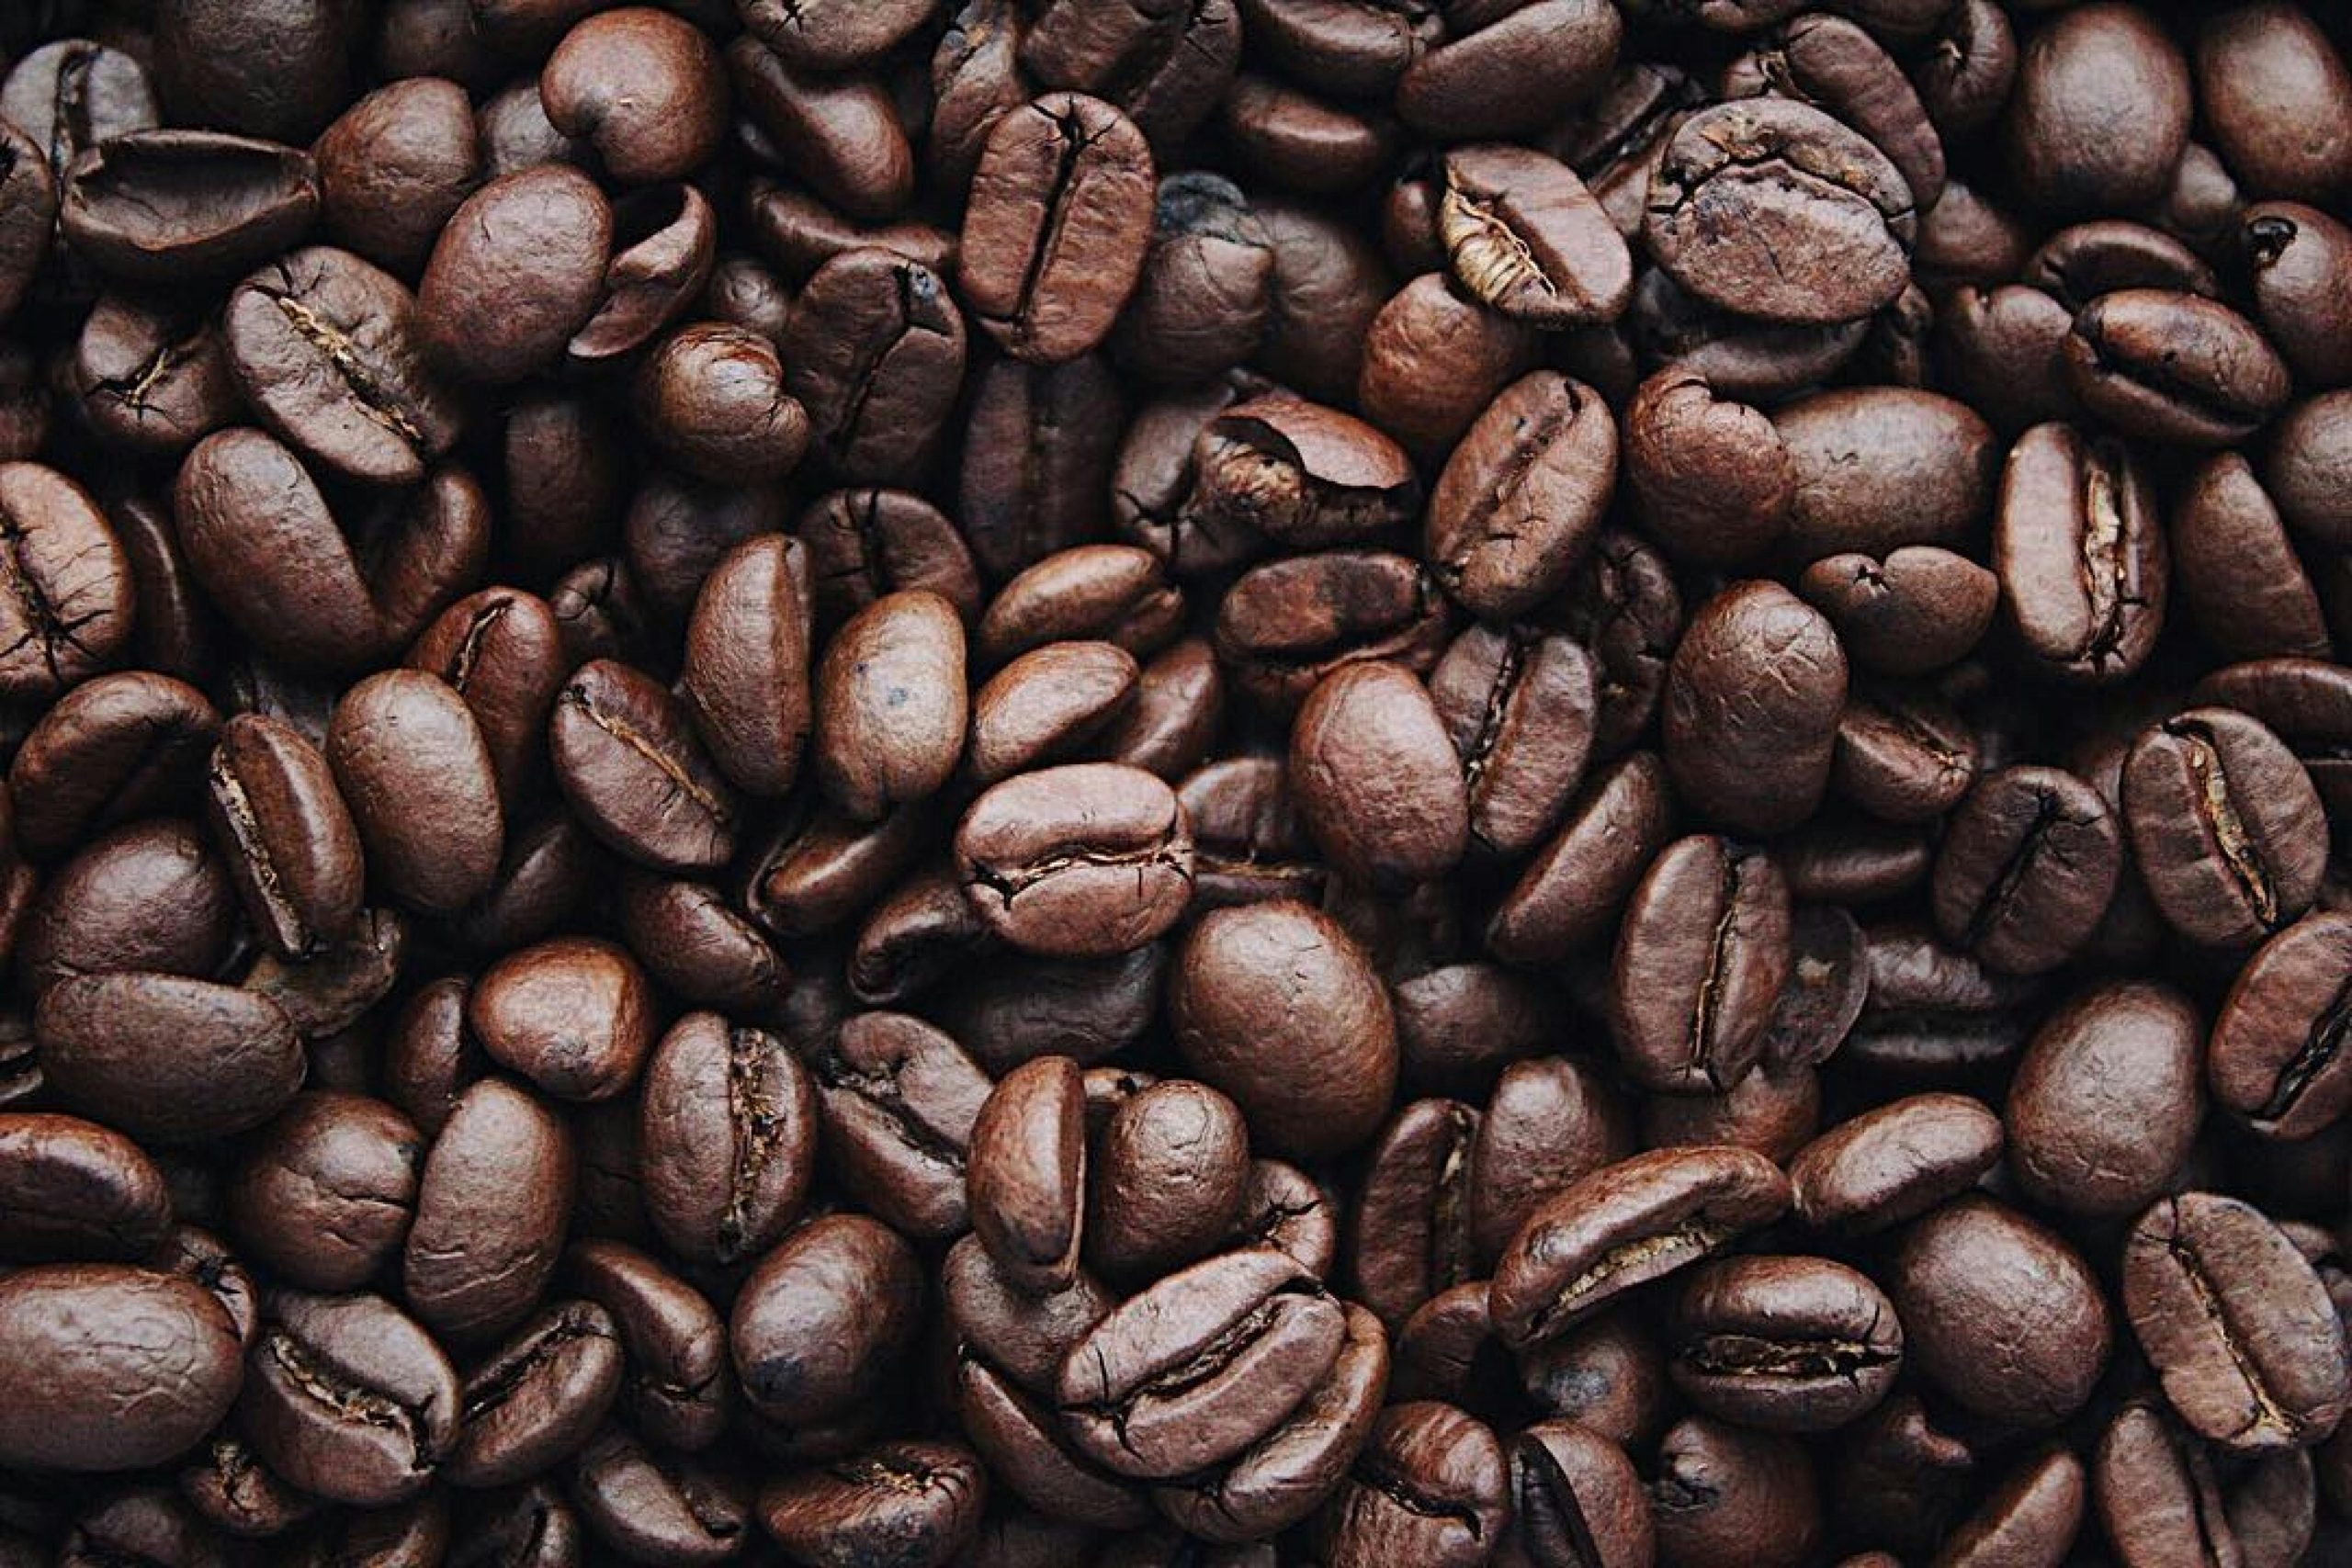 Dominican coffee exports reached US$75 million between 2020-2023